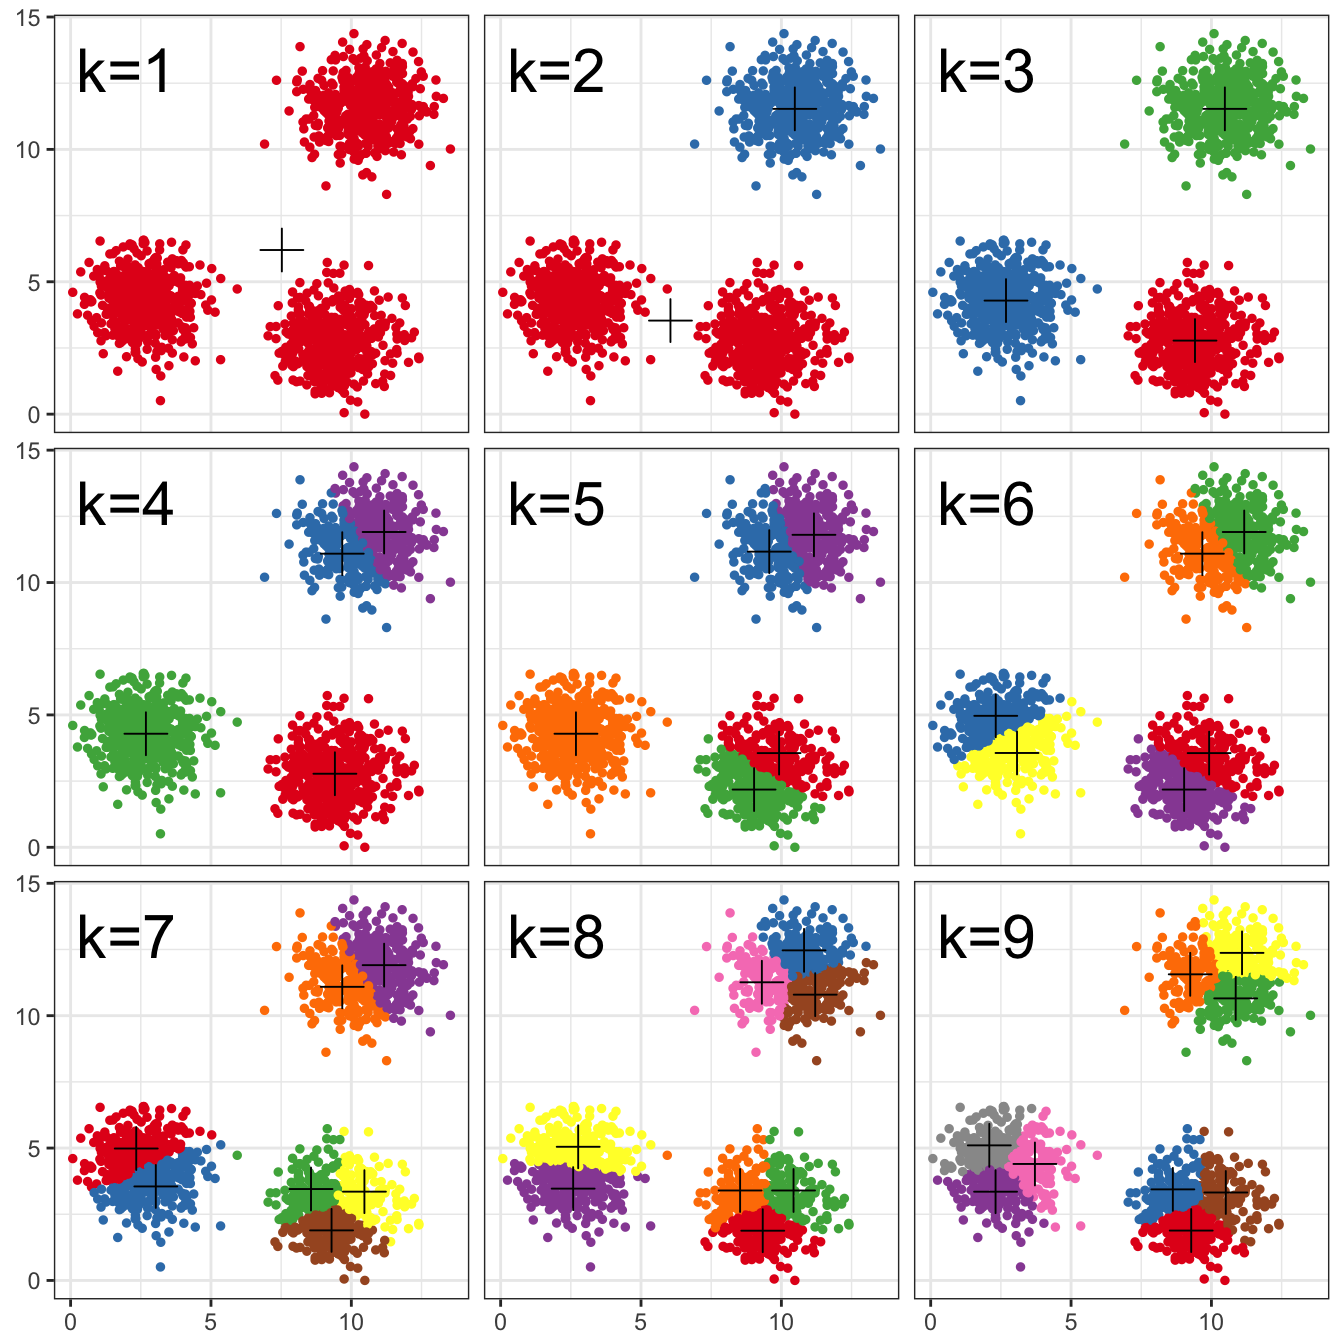 K-means clustering of the blobs data set using a range of values of k from 1-9. Cluster centres indicated with a cross.